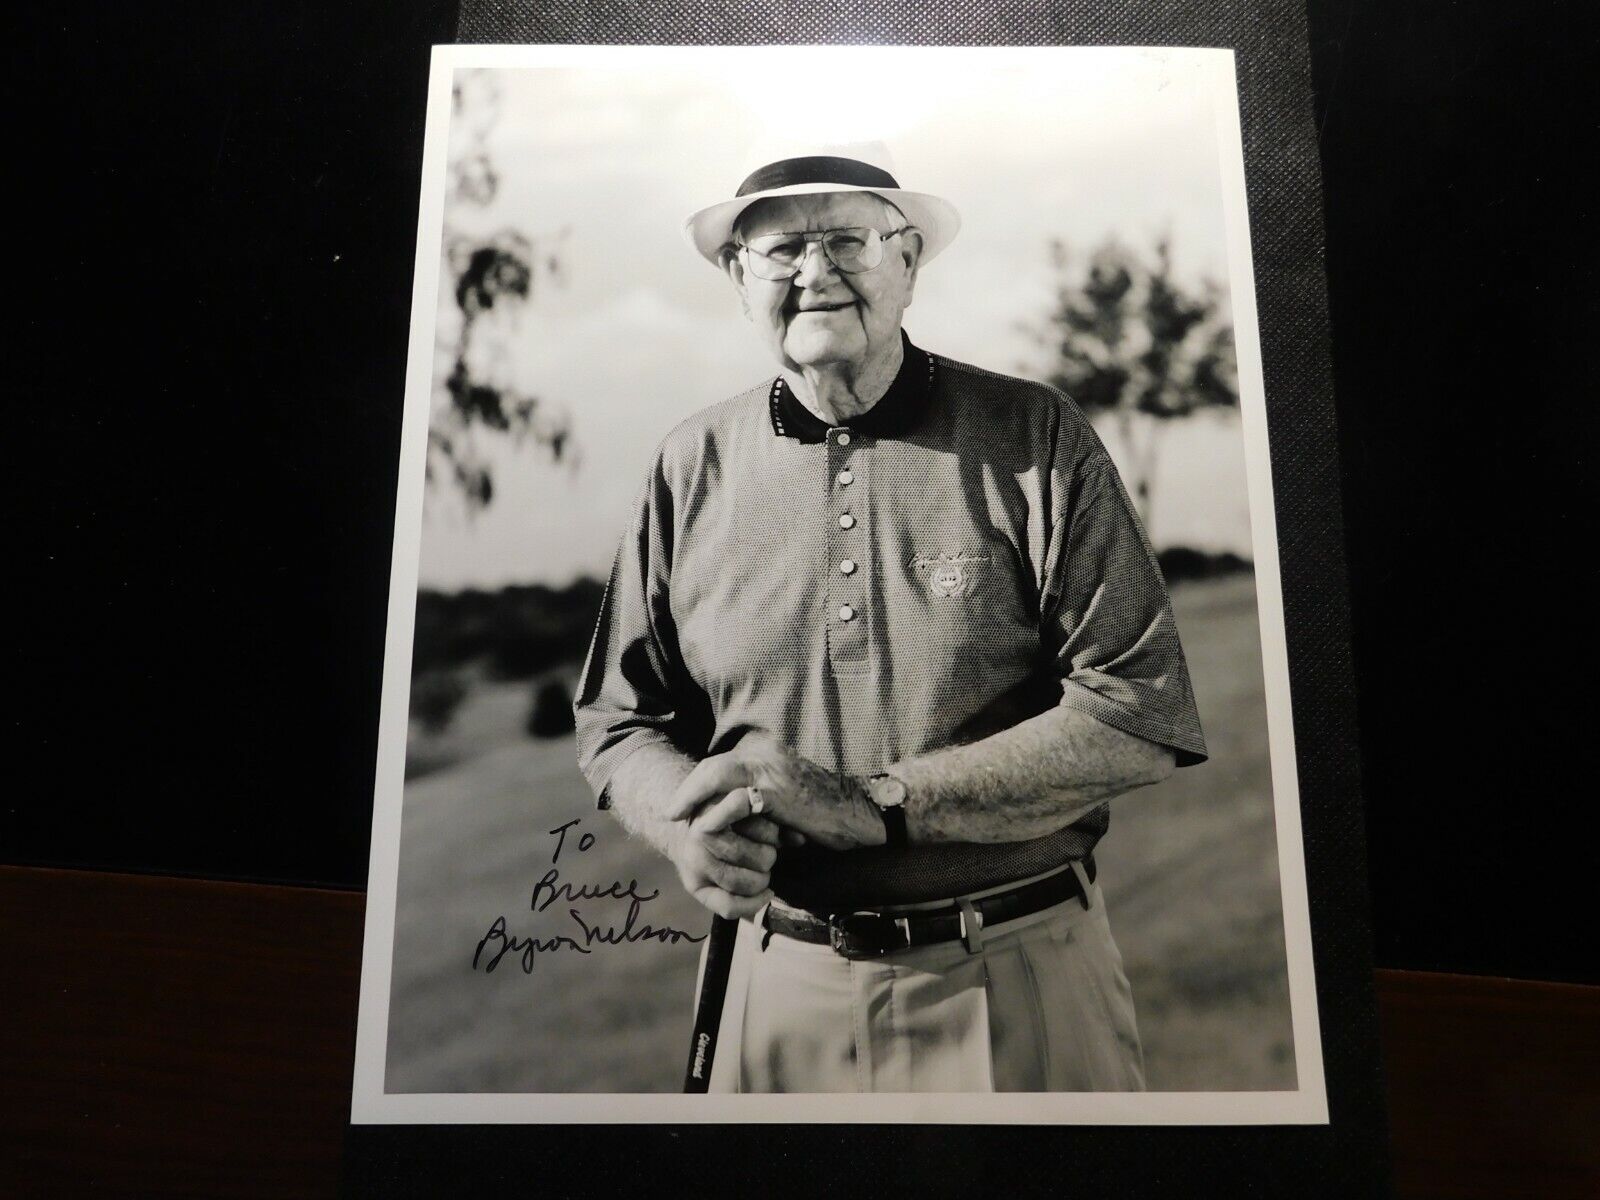 TO BRUCE BYRON NELSON AUTOGRAPH PHOTOGRAPH   c604XNSS12